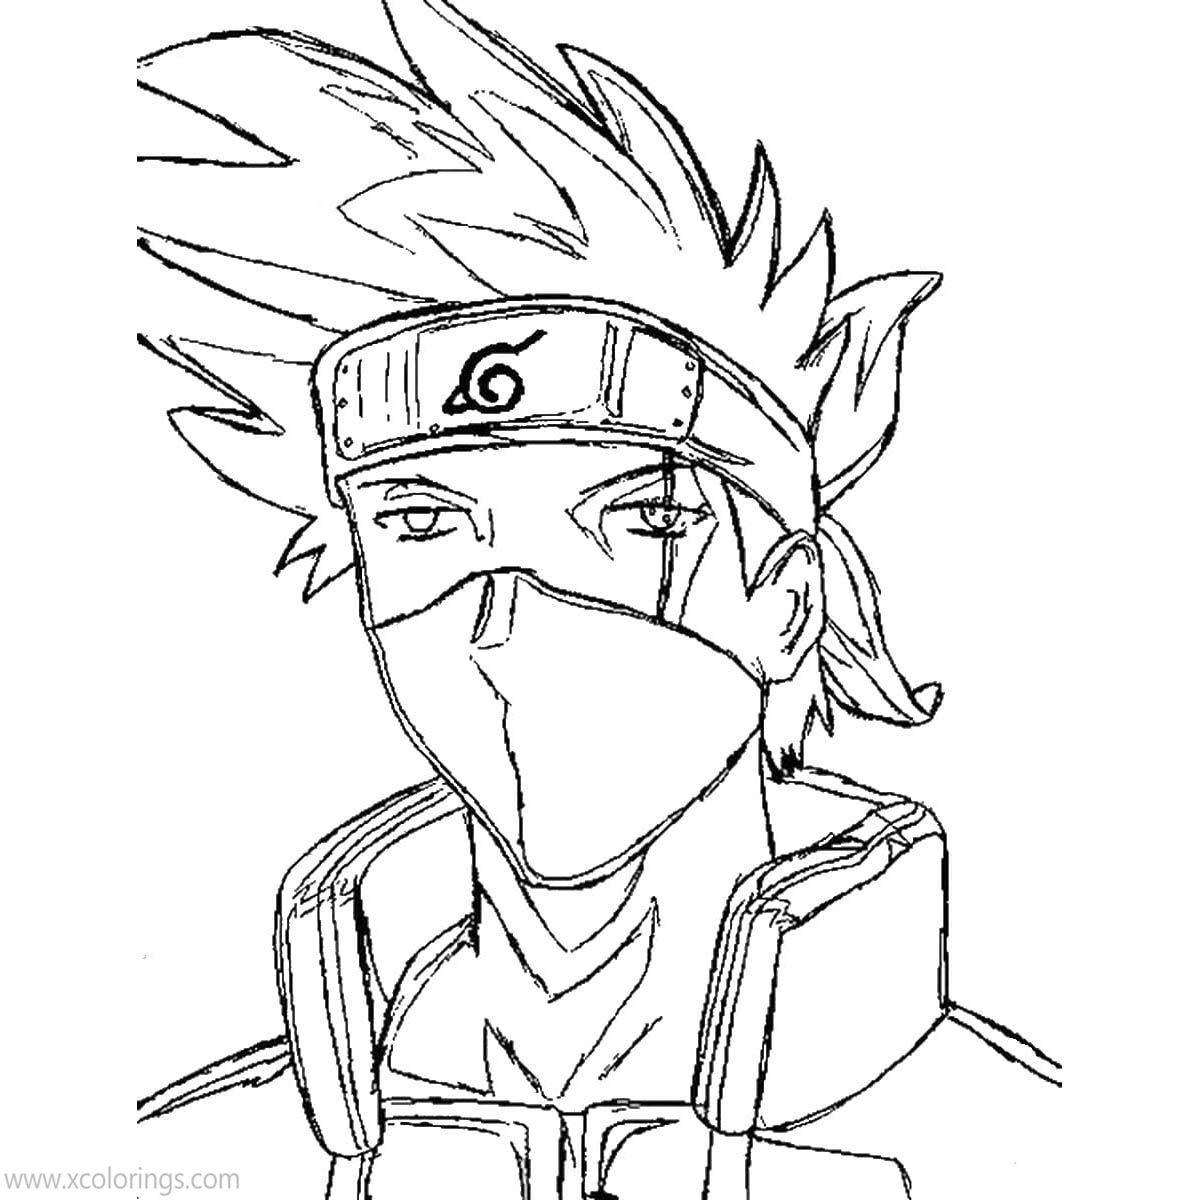 Kakashi with Mask Coloring Pages - XColorings.com